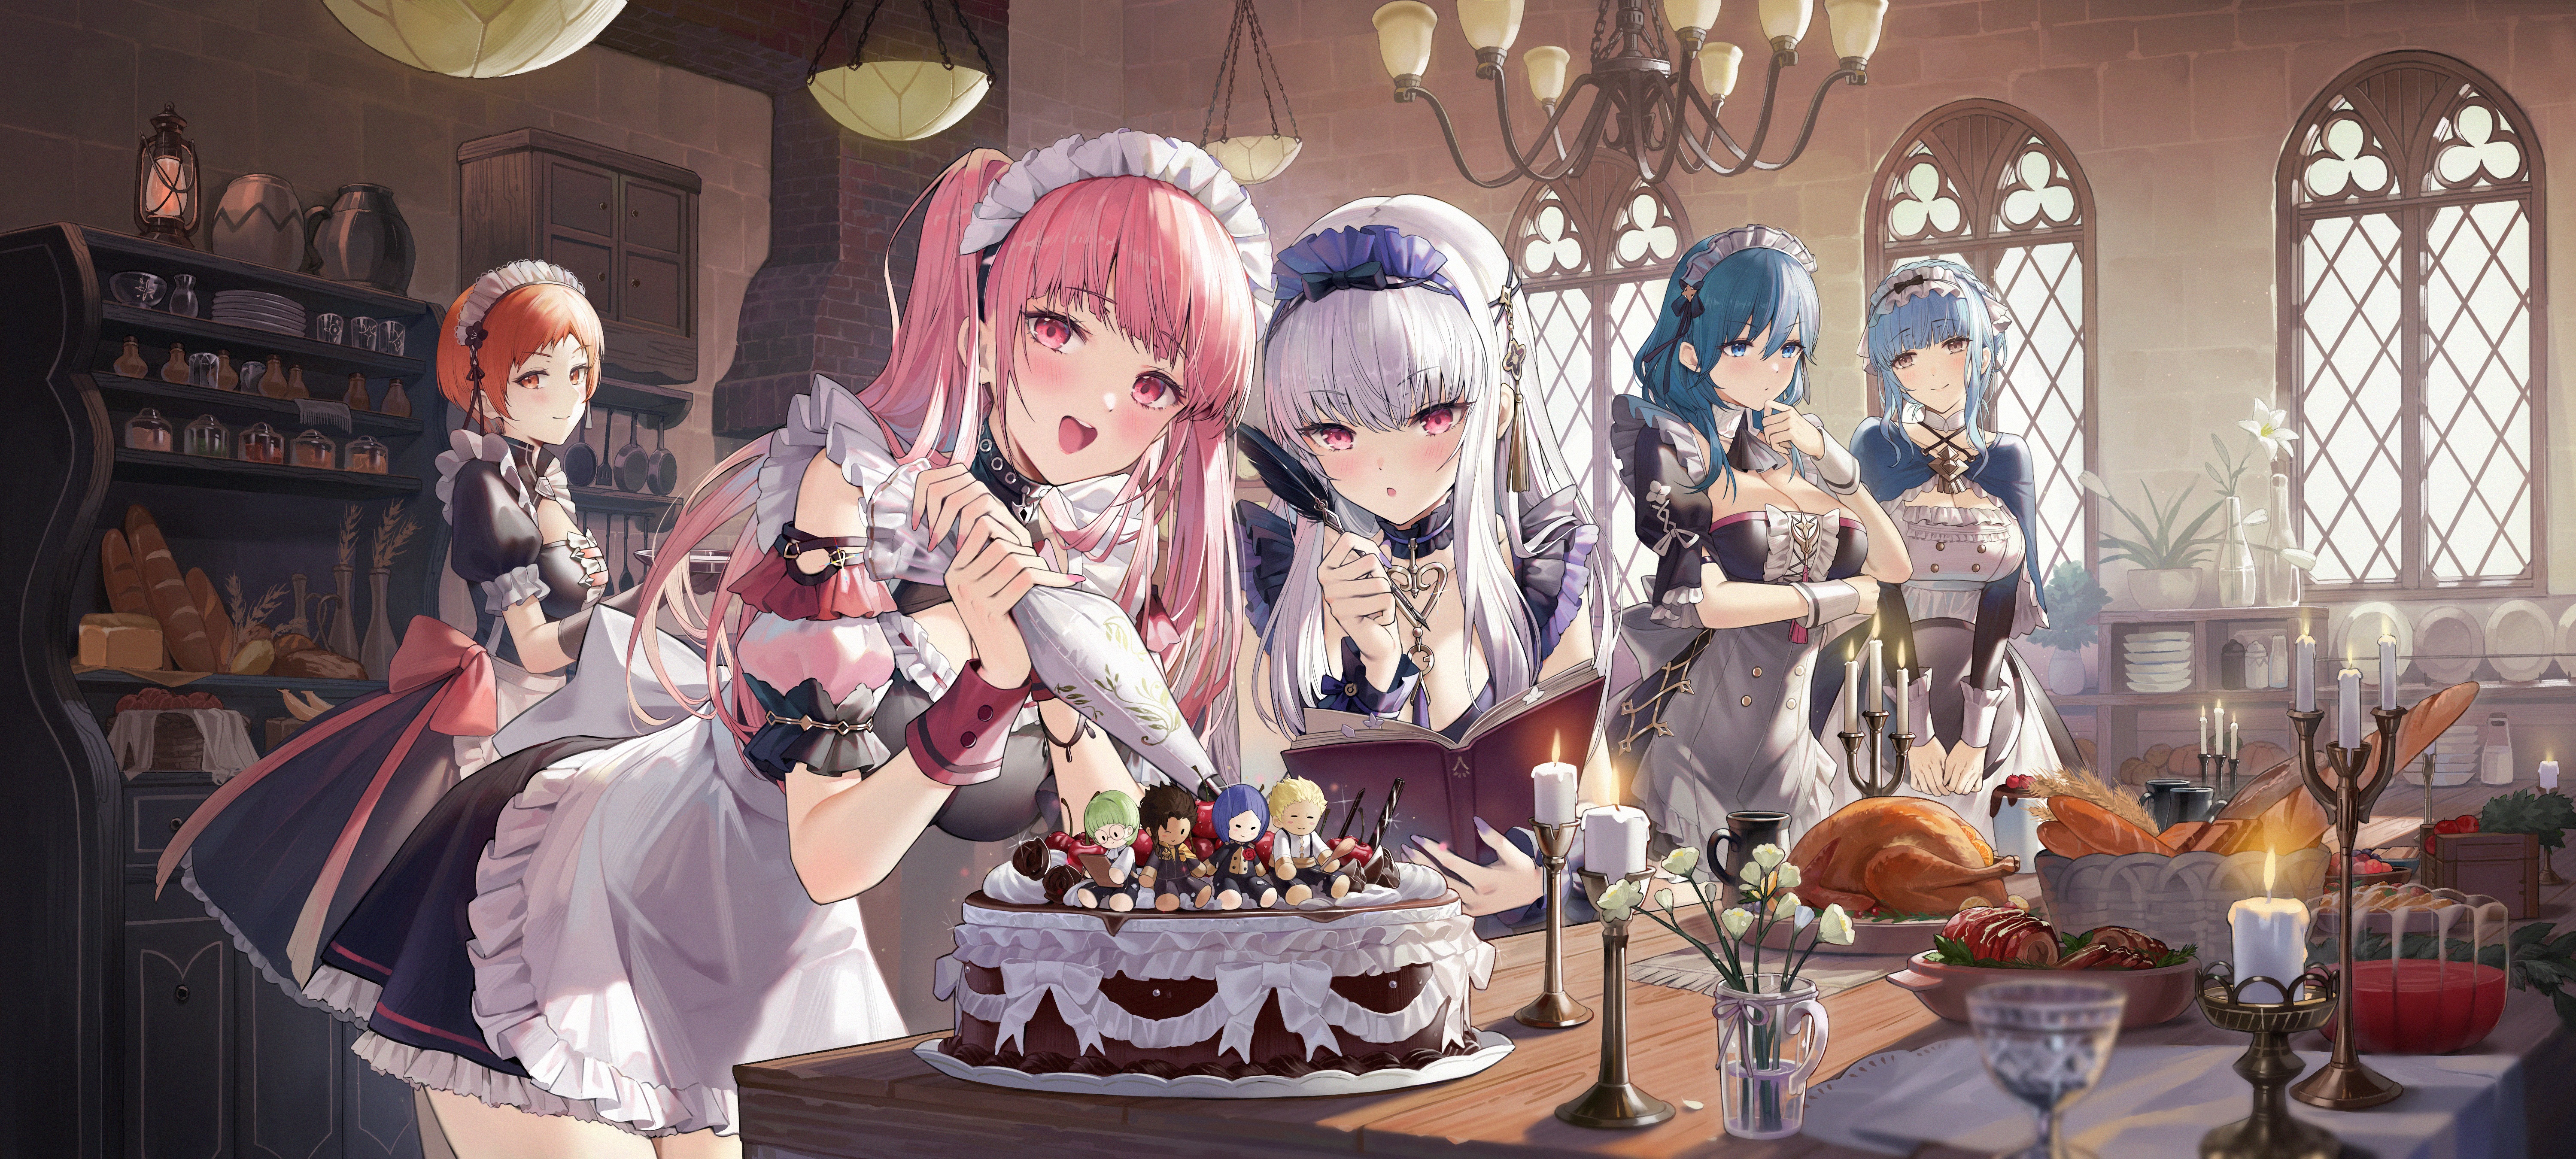 Anime 6000x2700 anime anime girls cake food sweets pink hair group of women candles open mouth long hair